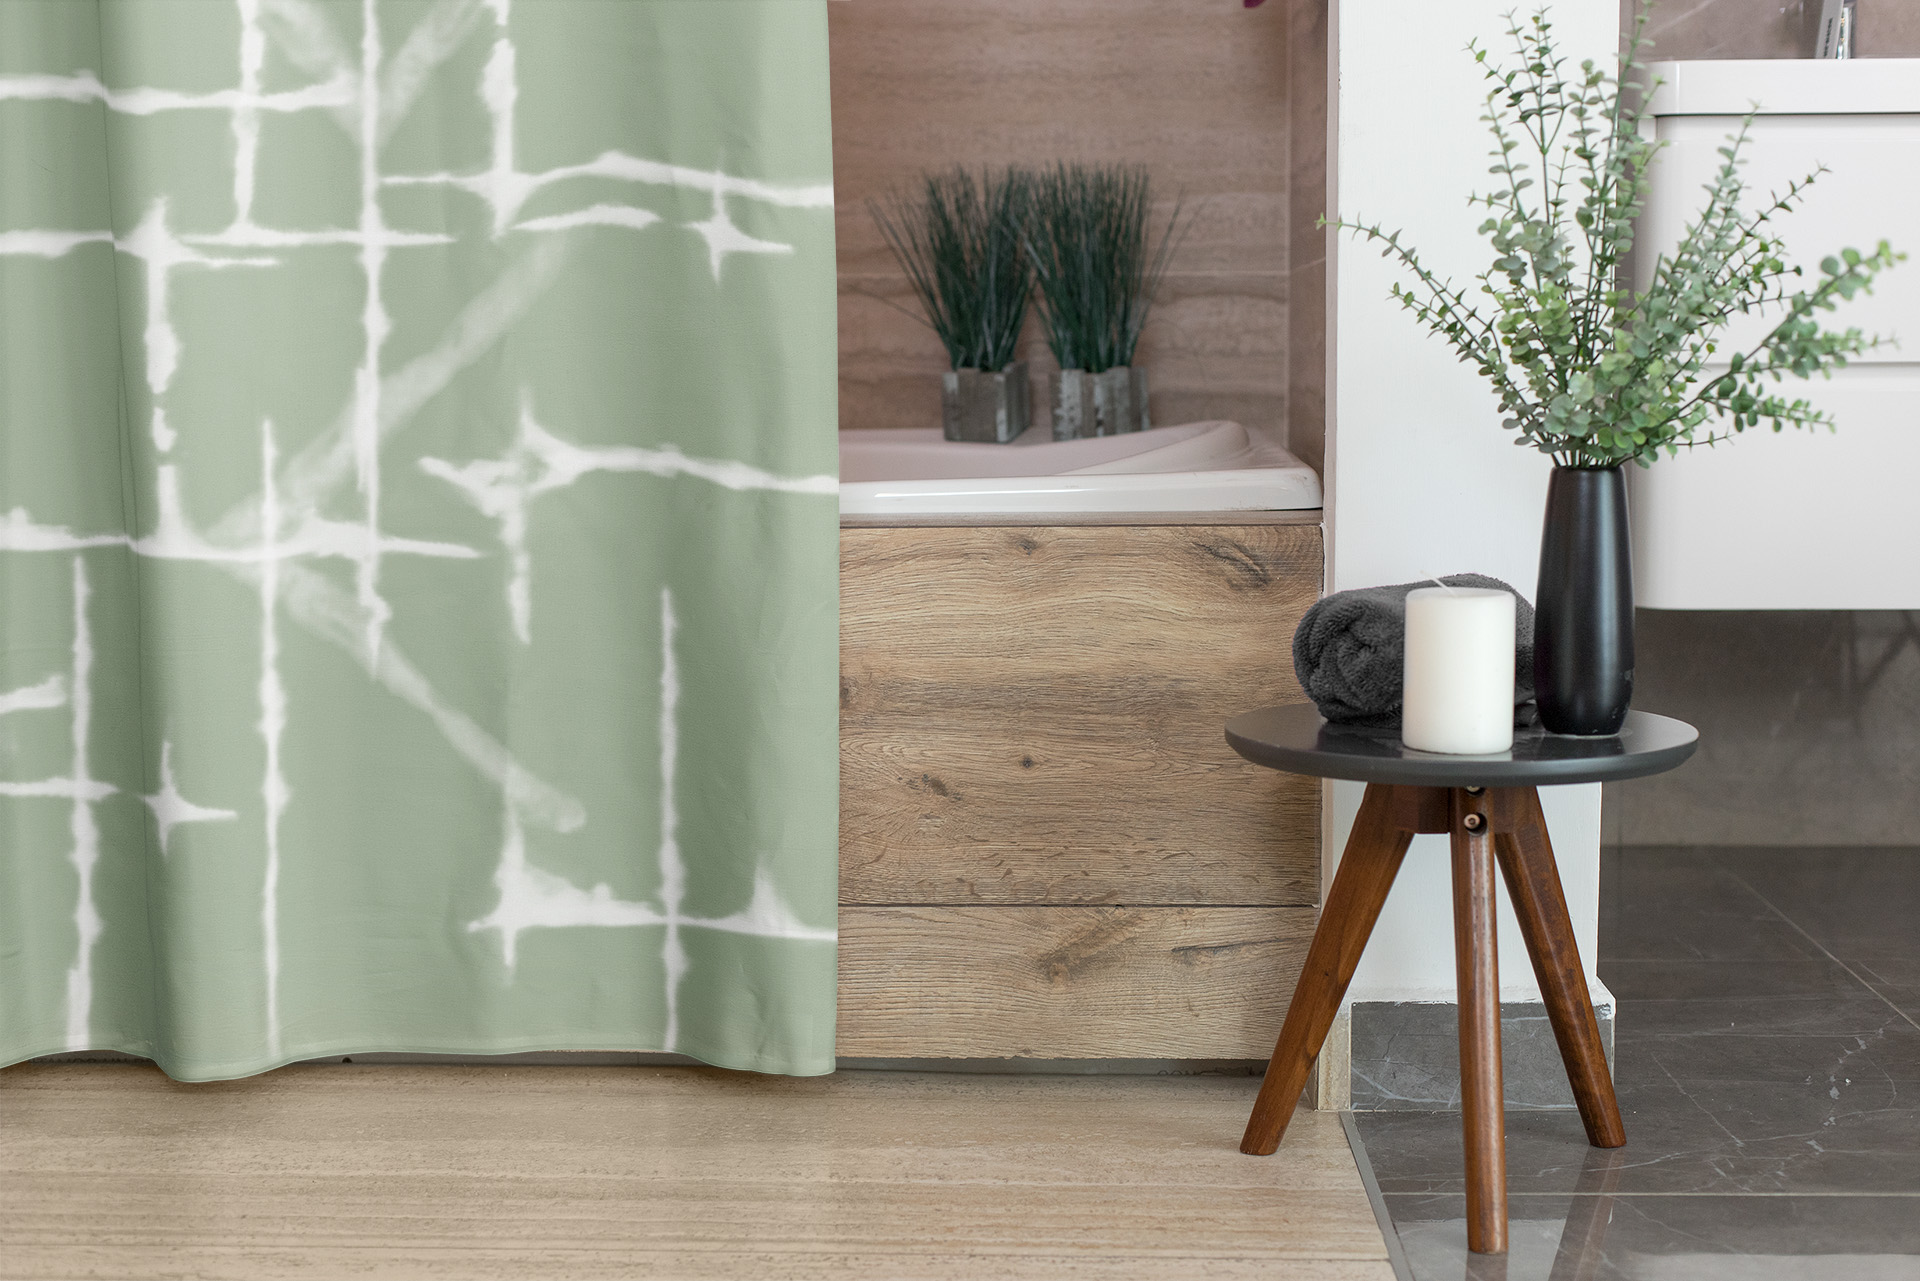 10 Creative Ideas to Decorate Your Bathroom with Printed Shower Curtains